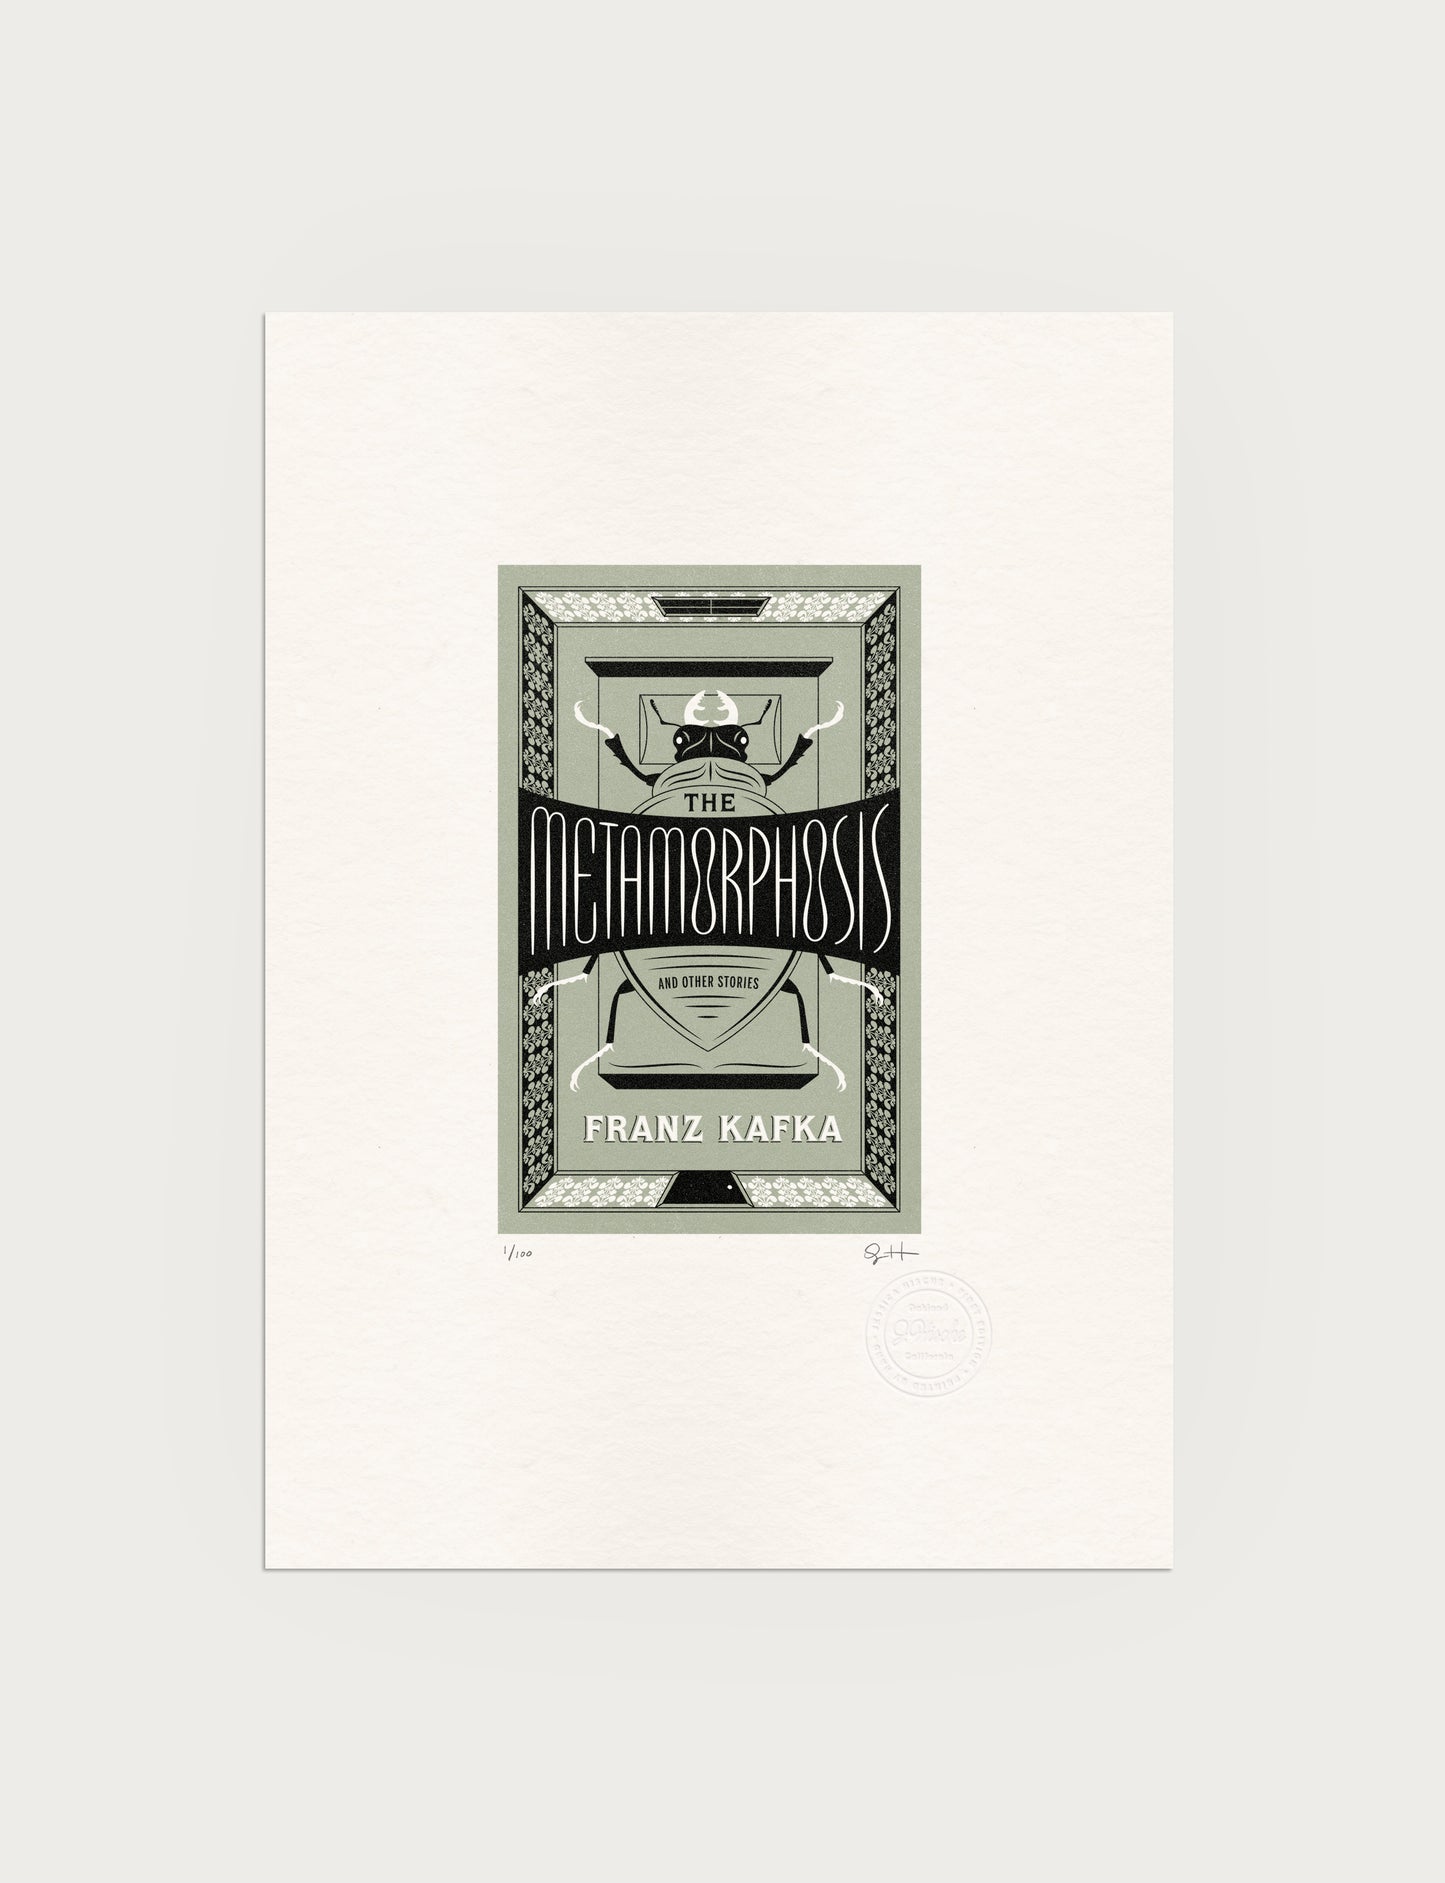 2-color letterpress print in green and black. Printed artwork is an illustrated book cover of The Metamorphosis including custom hand lettering.